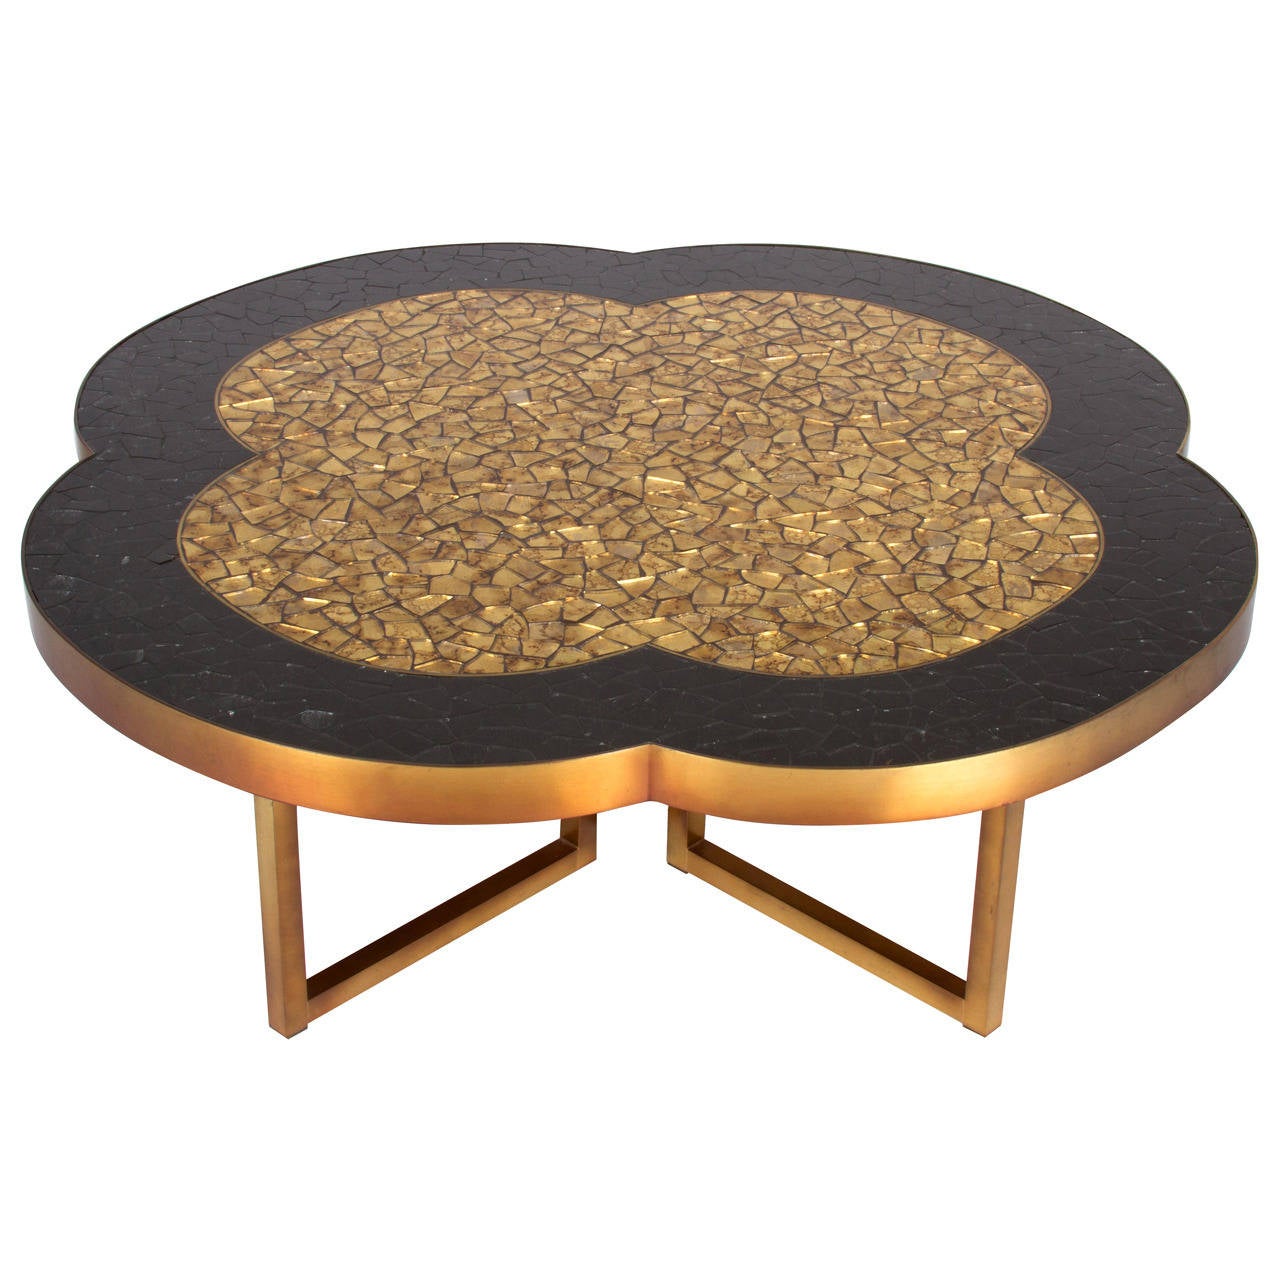 Gold leaf, brass and black glass mosaic quatrefoil coffee table, 1950s